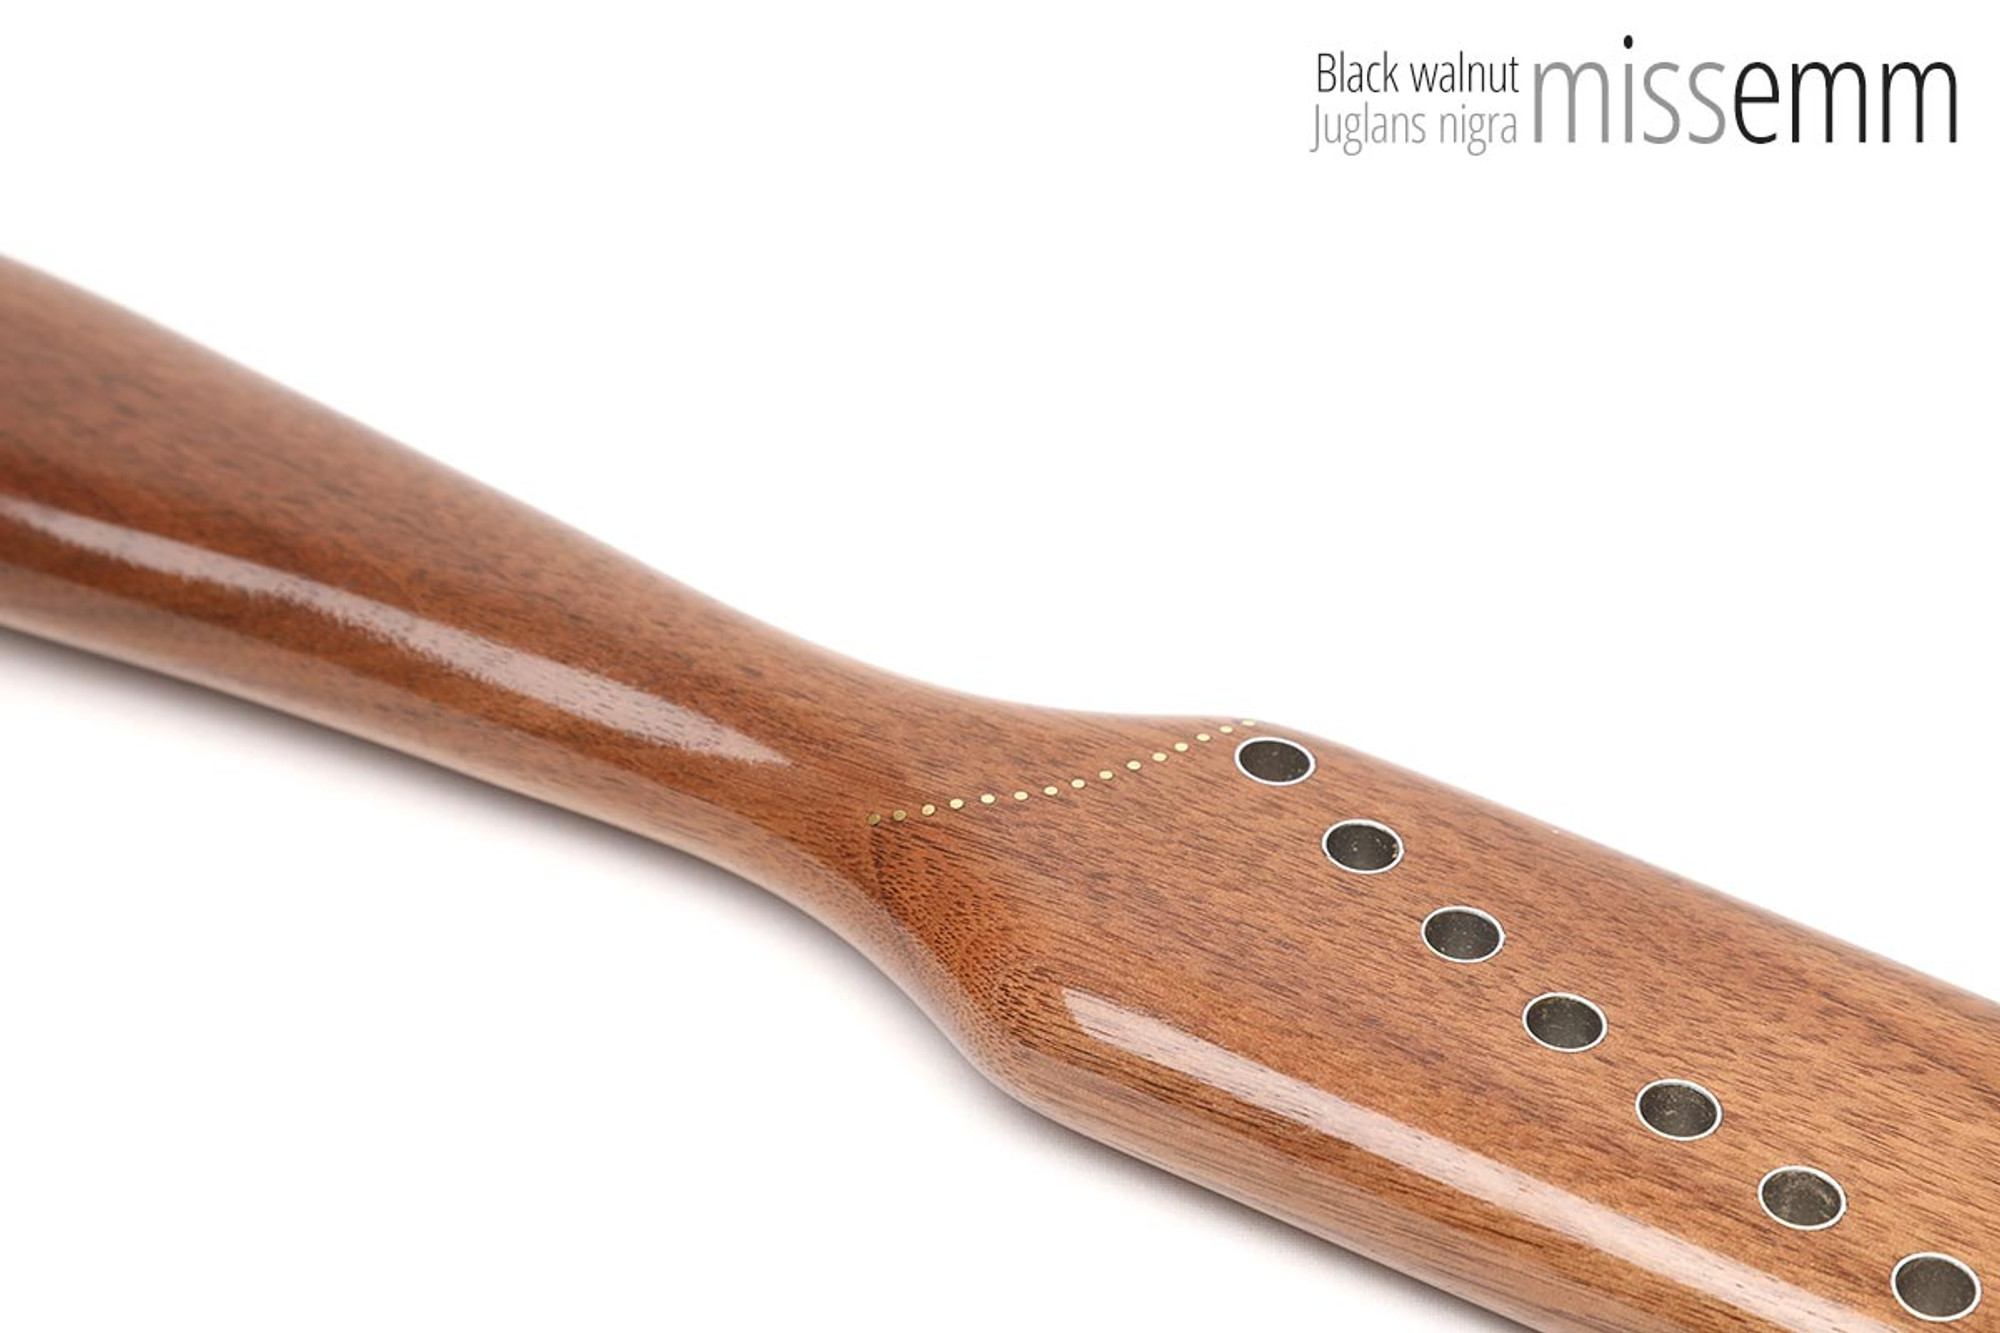 Handcrafted Wooden Paddle with Holes for BDSM and Spanking Fetish